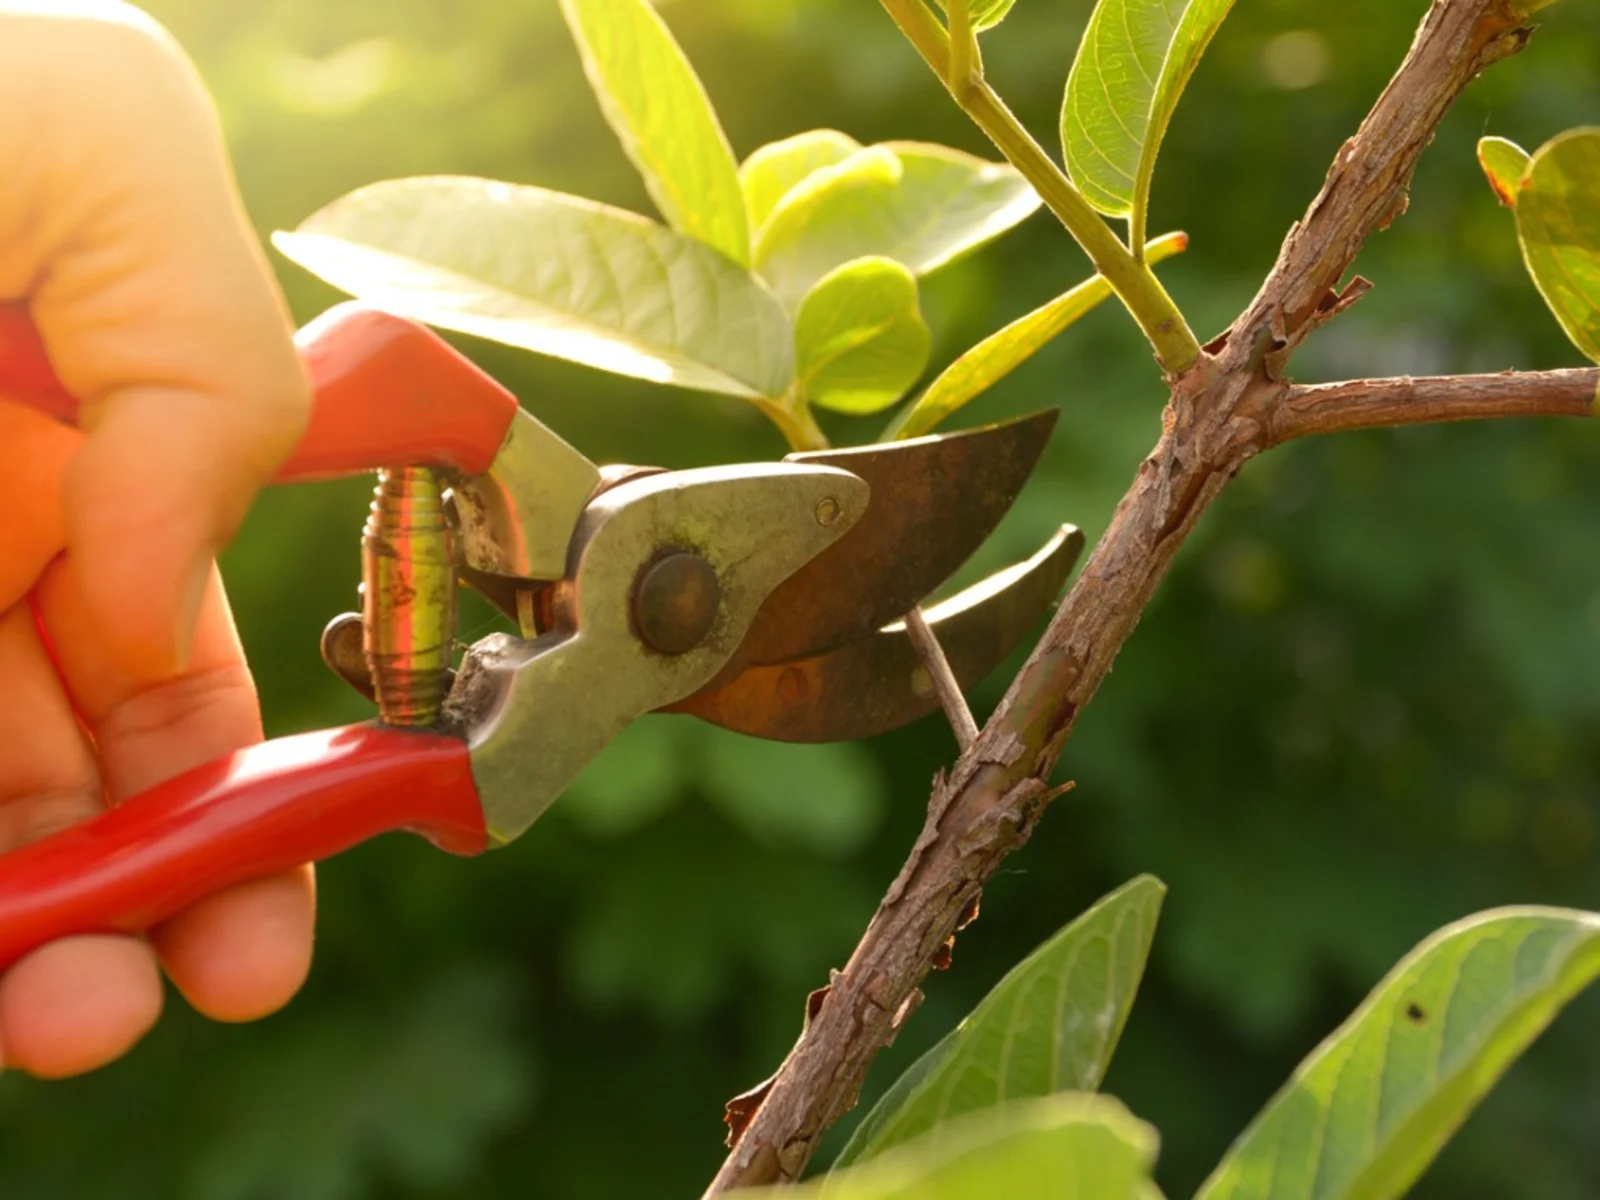 Gardening Services In Liss ,An example of pruning a branch/stem, another one of our garden services.